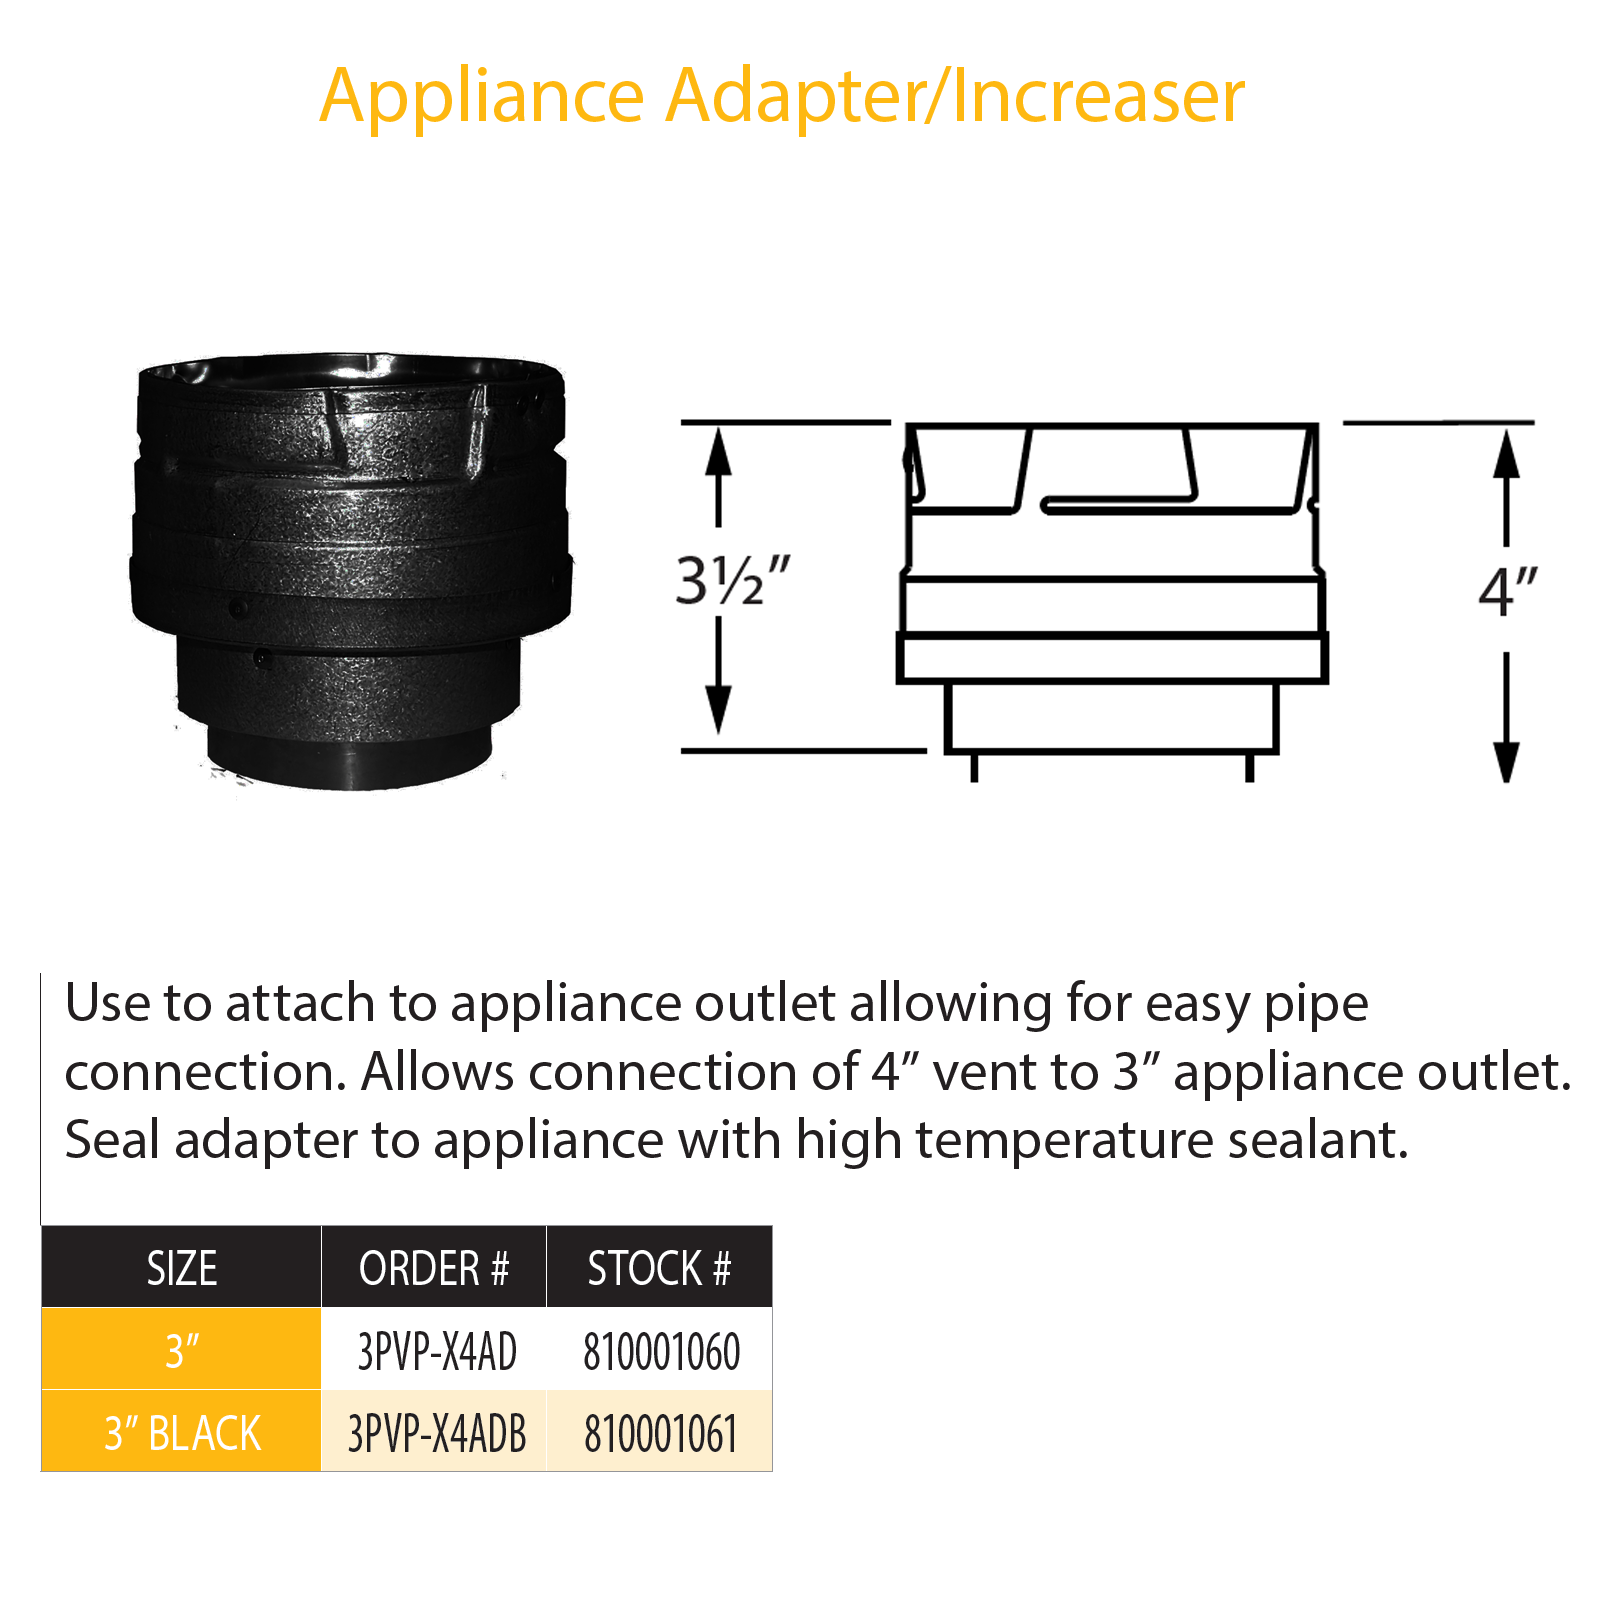 DuraVent PVP Appliance Adapter/Increaser 3" - 4" (black) | 3PVP-X4ADB